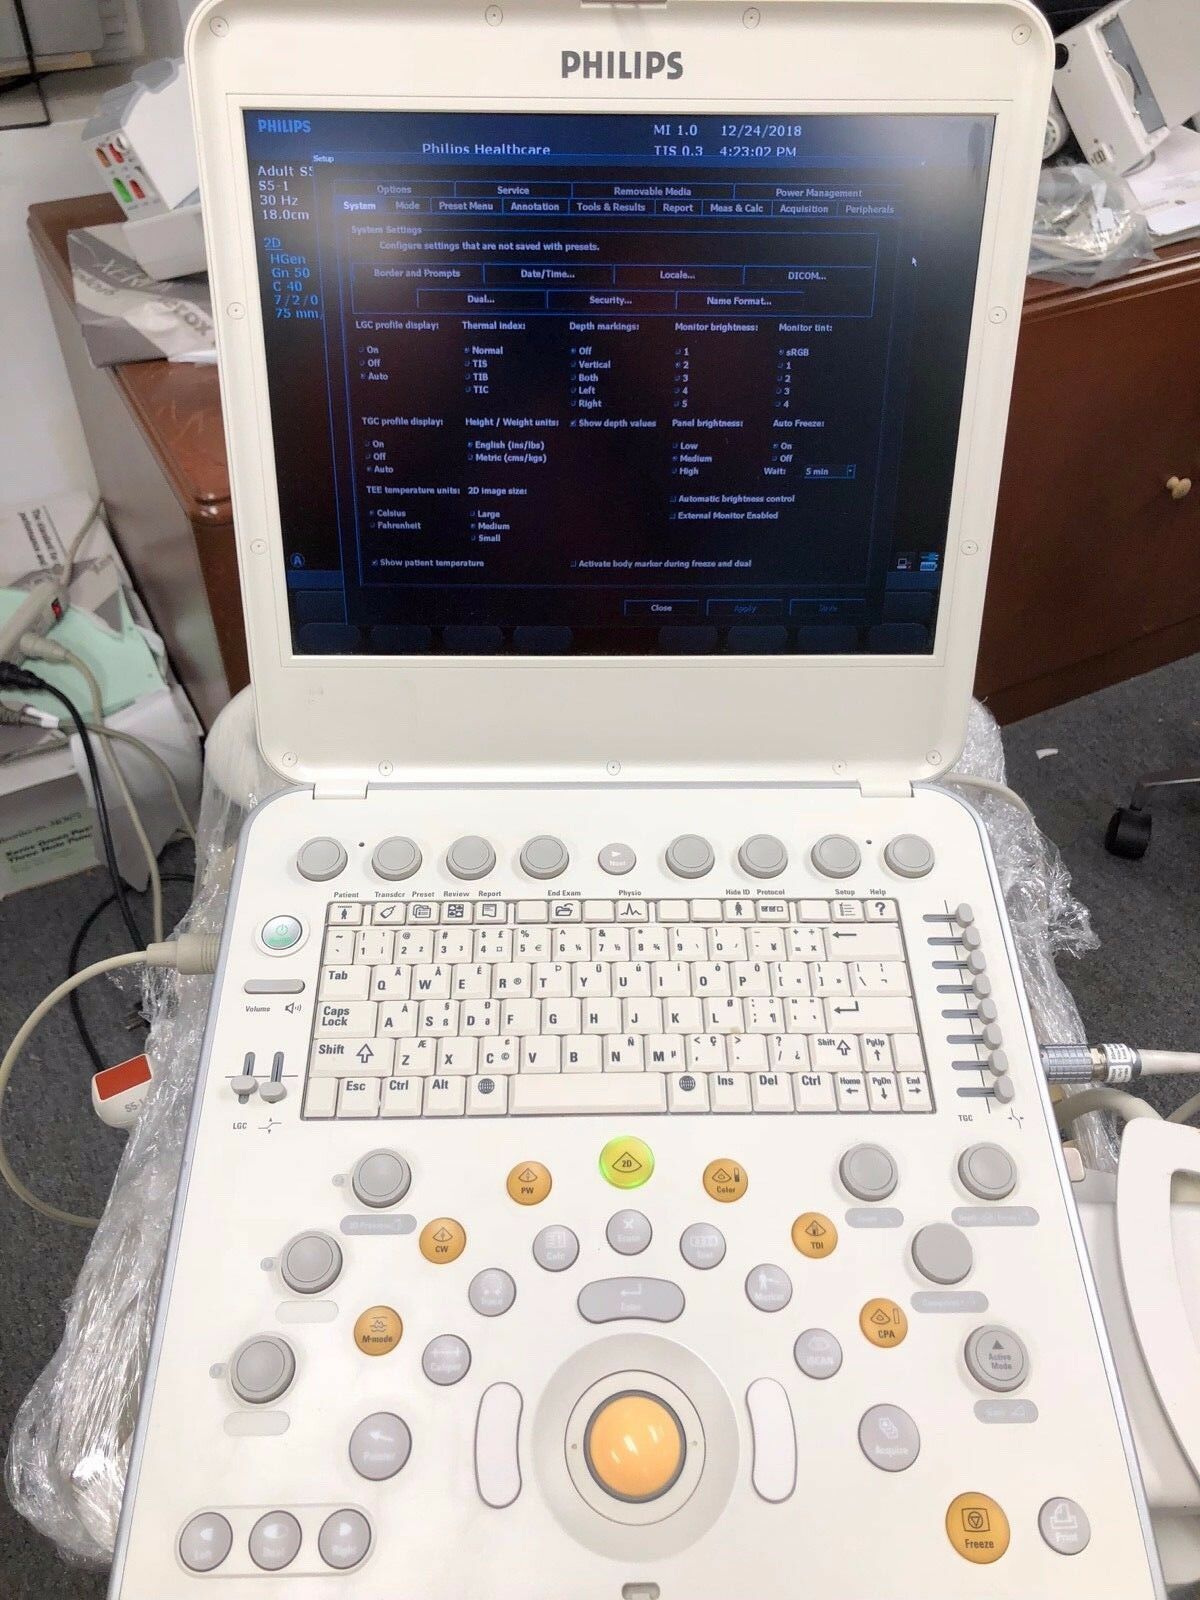 Philips CX50 Cardiac Vascular Abdominal Ultrasound S5-1, C5-1, L12-3 Available DIAGNOSTIC ULTRASOUND MACHINES FOR SALE